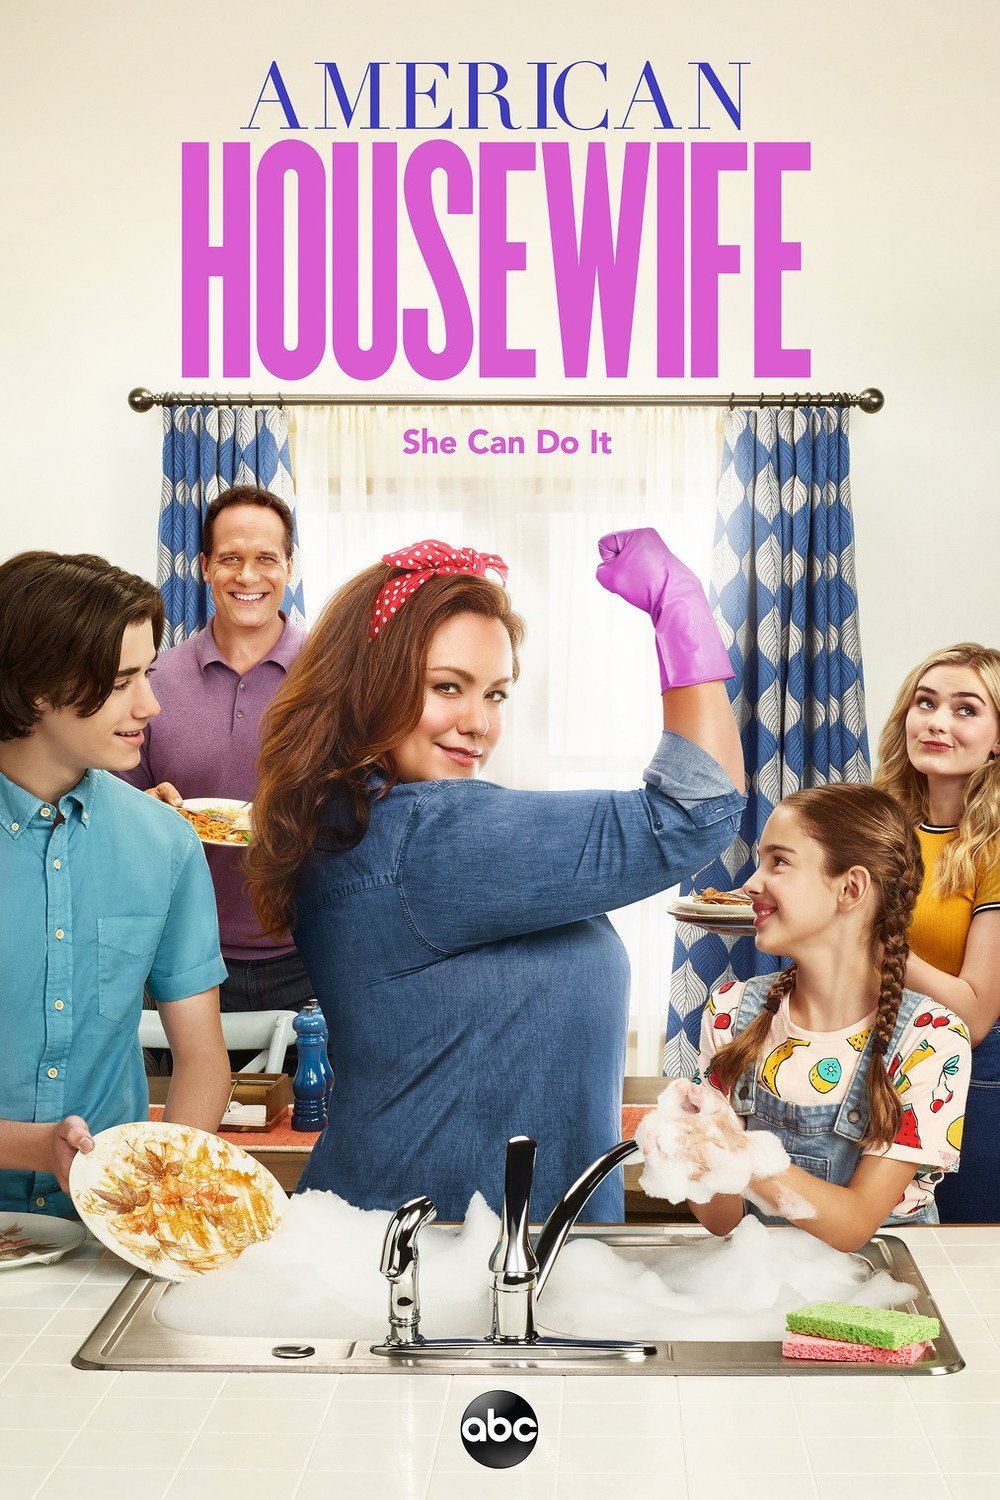 Poster of the movie American Housewife